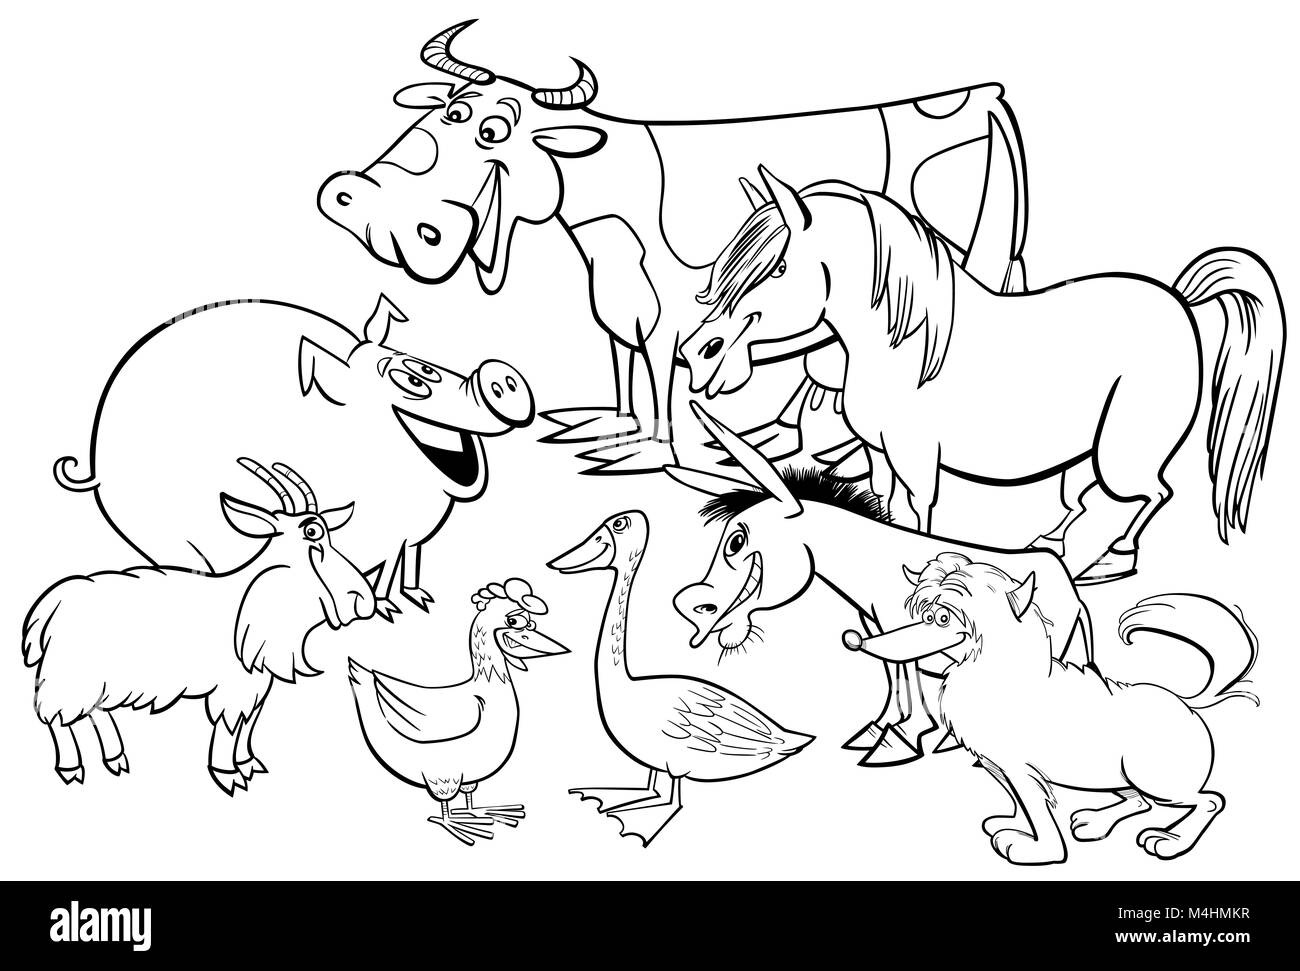 farm animal characters coloring book Stock Photo